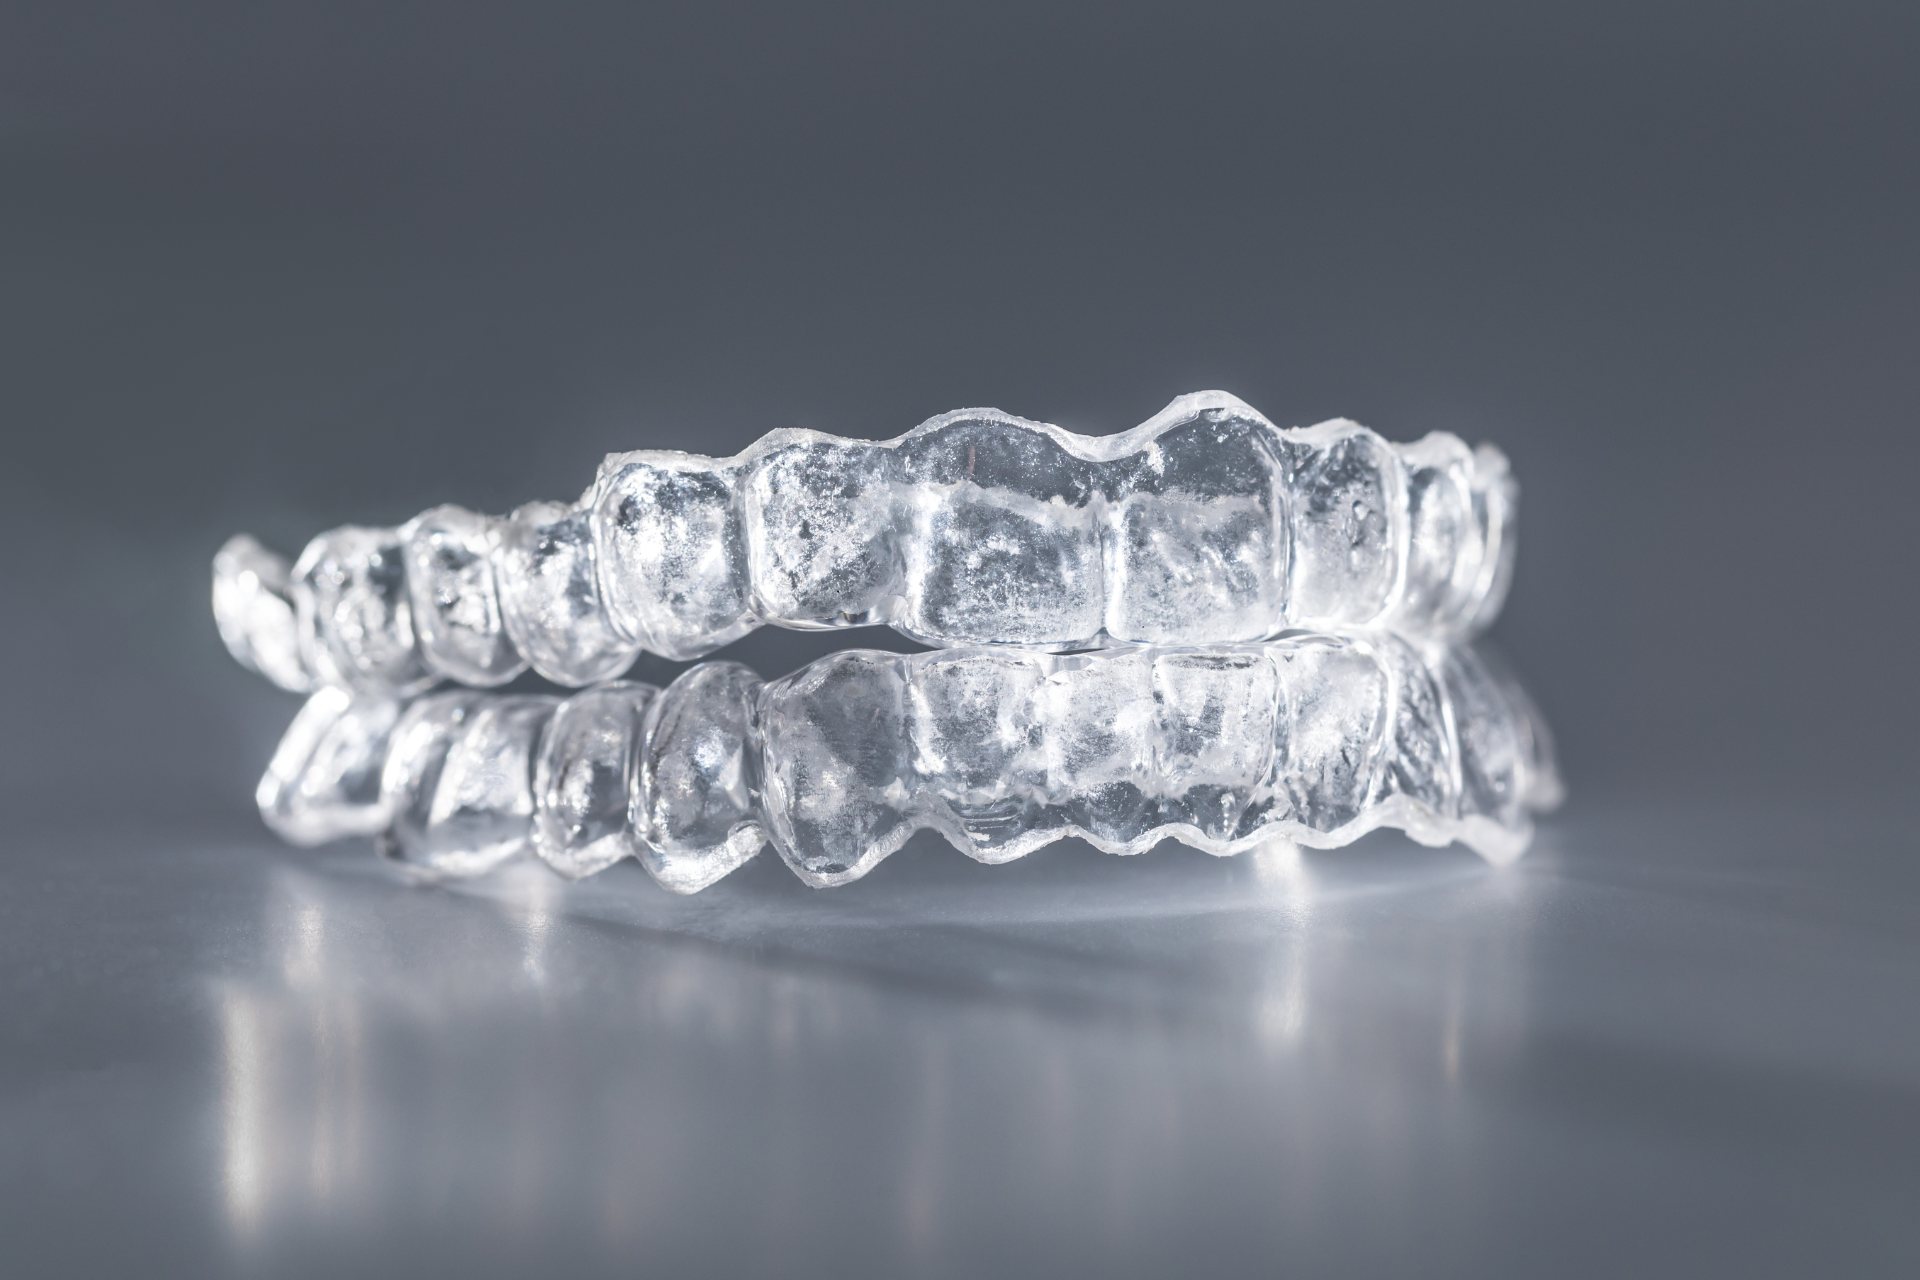 a pair of clear plastic teeth aligners on a gray surface